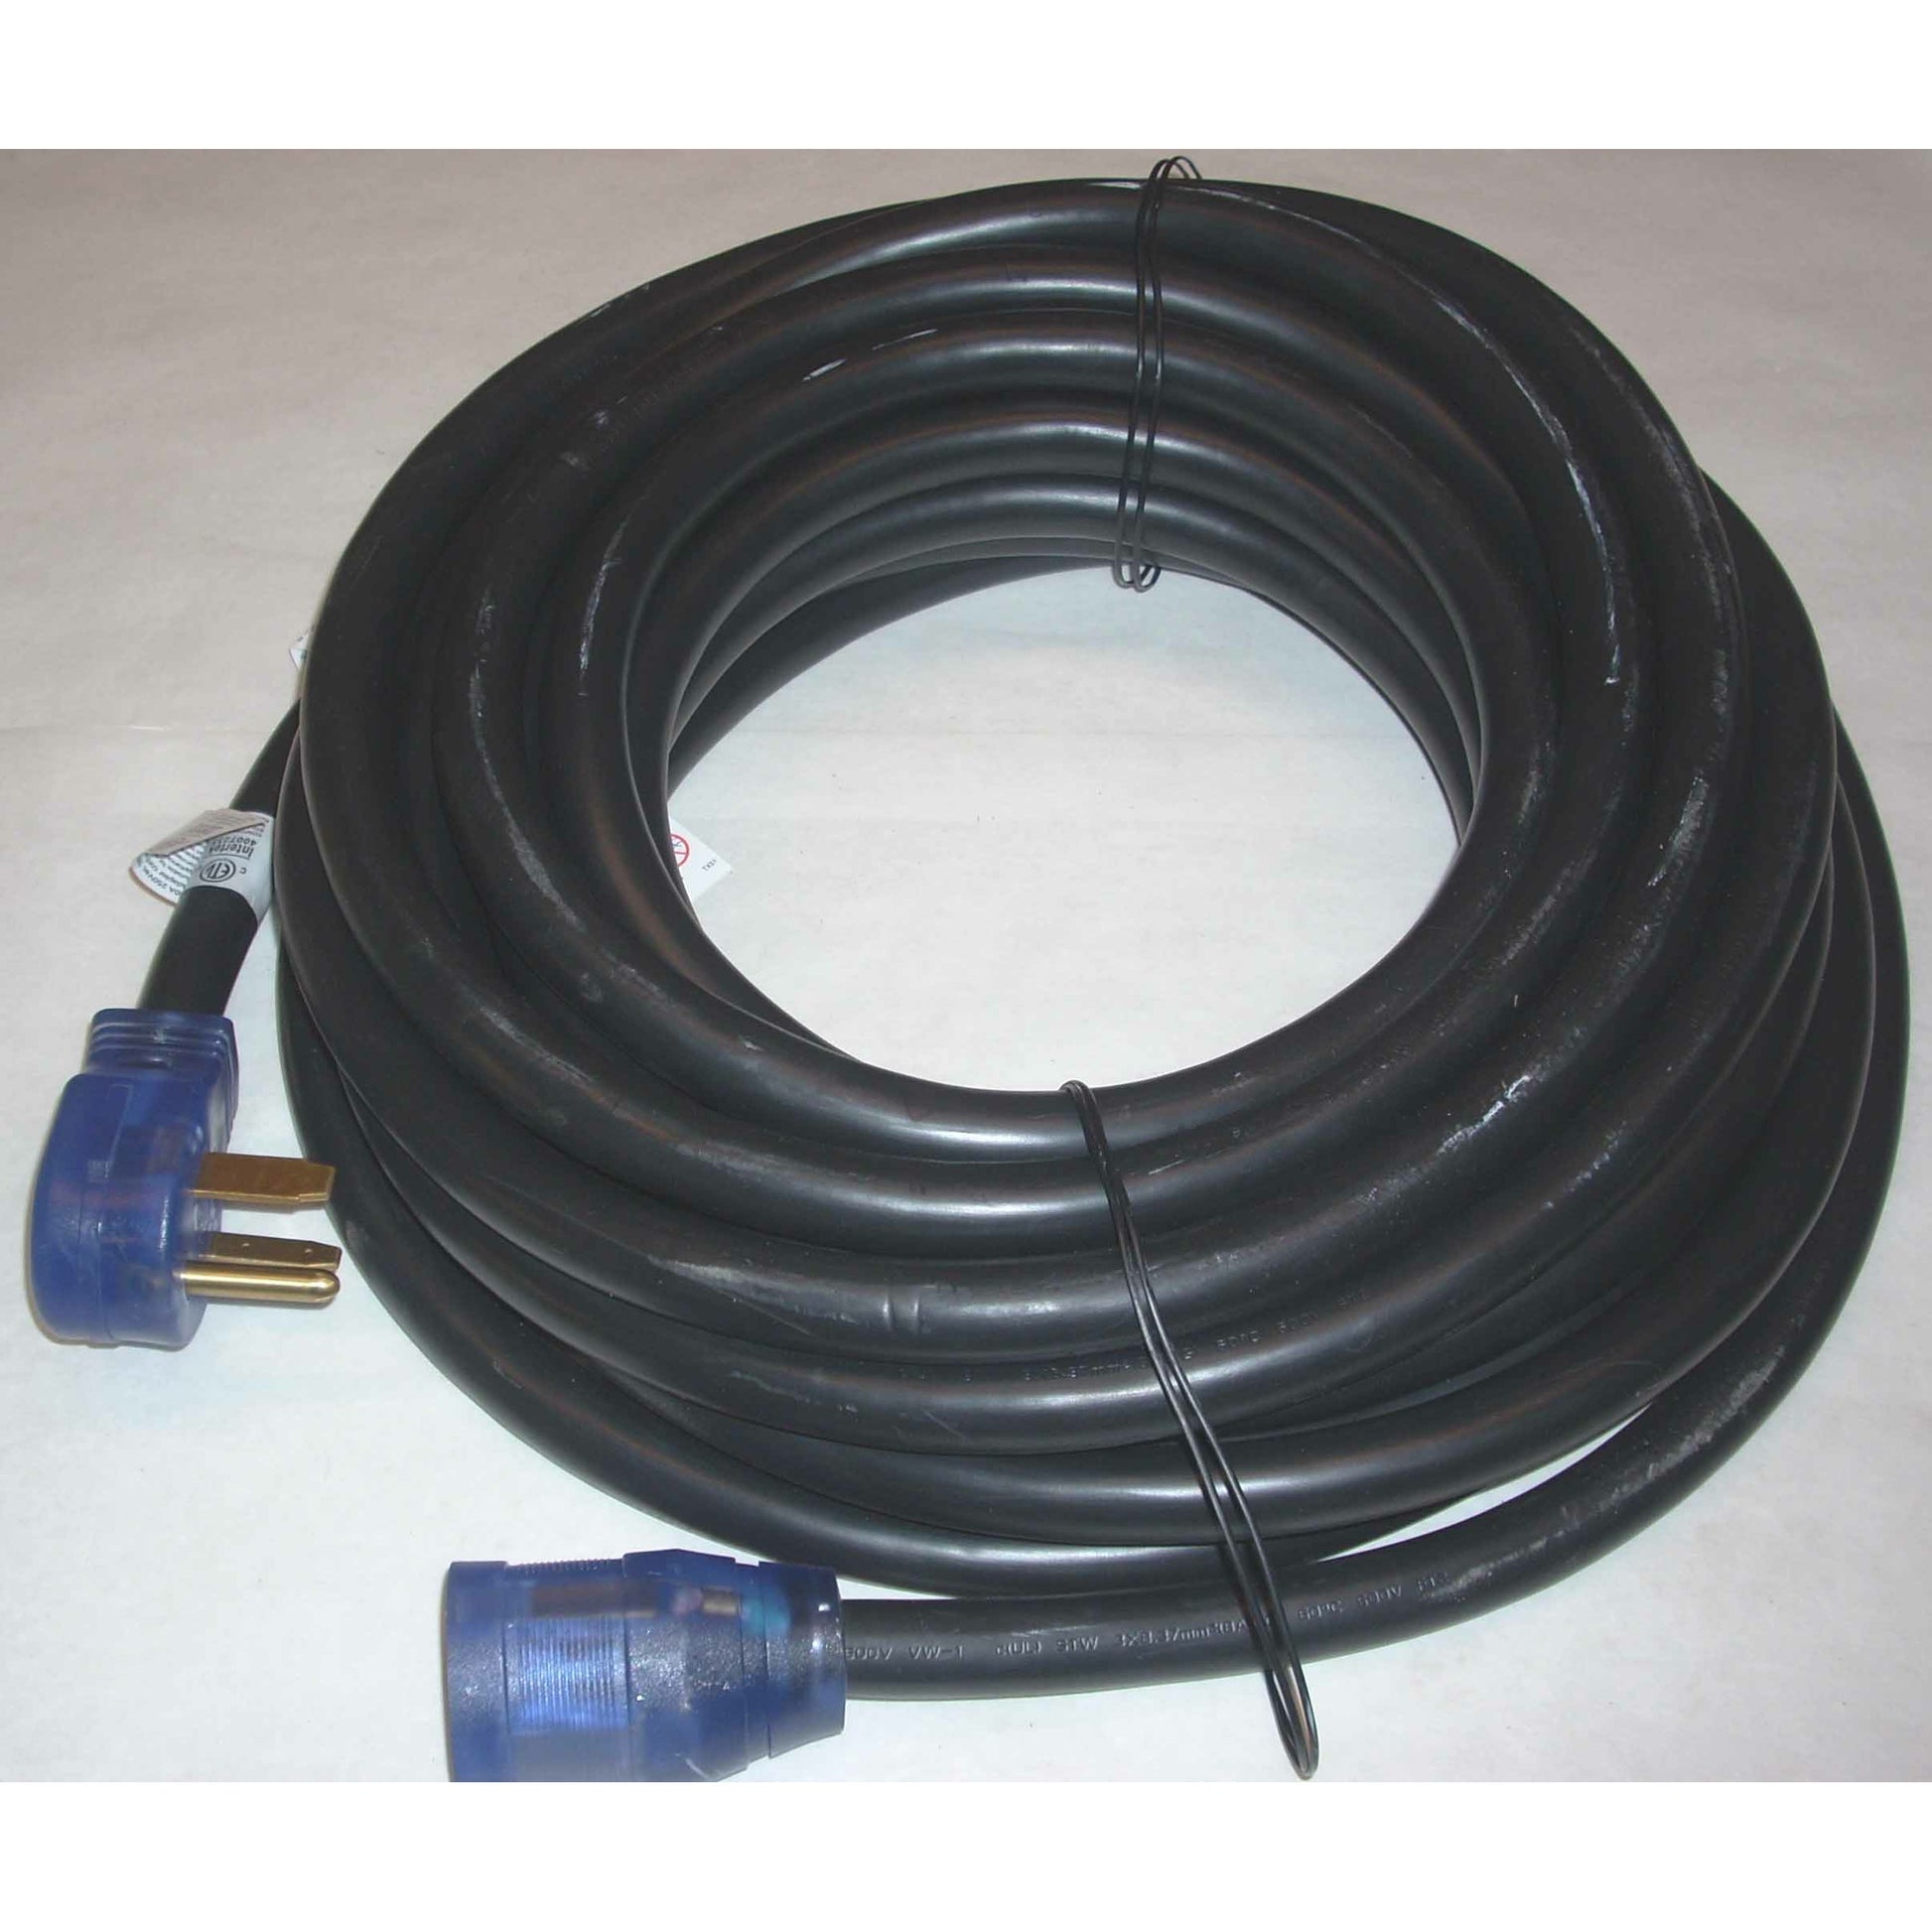 Welding Machine Extension Cable 50' 8/3 40A-250V - ATL Welding Supply